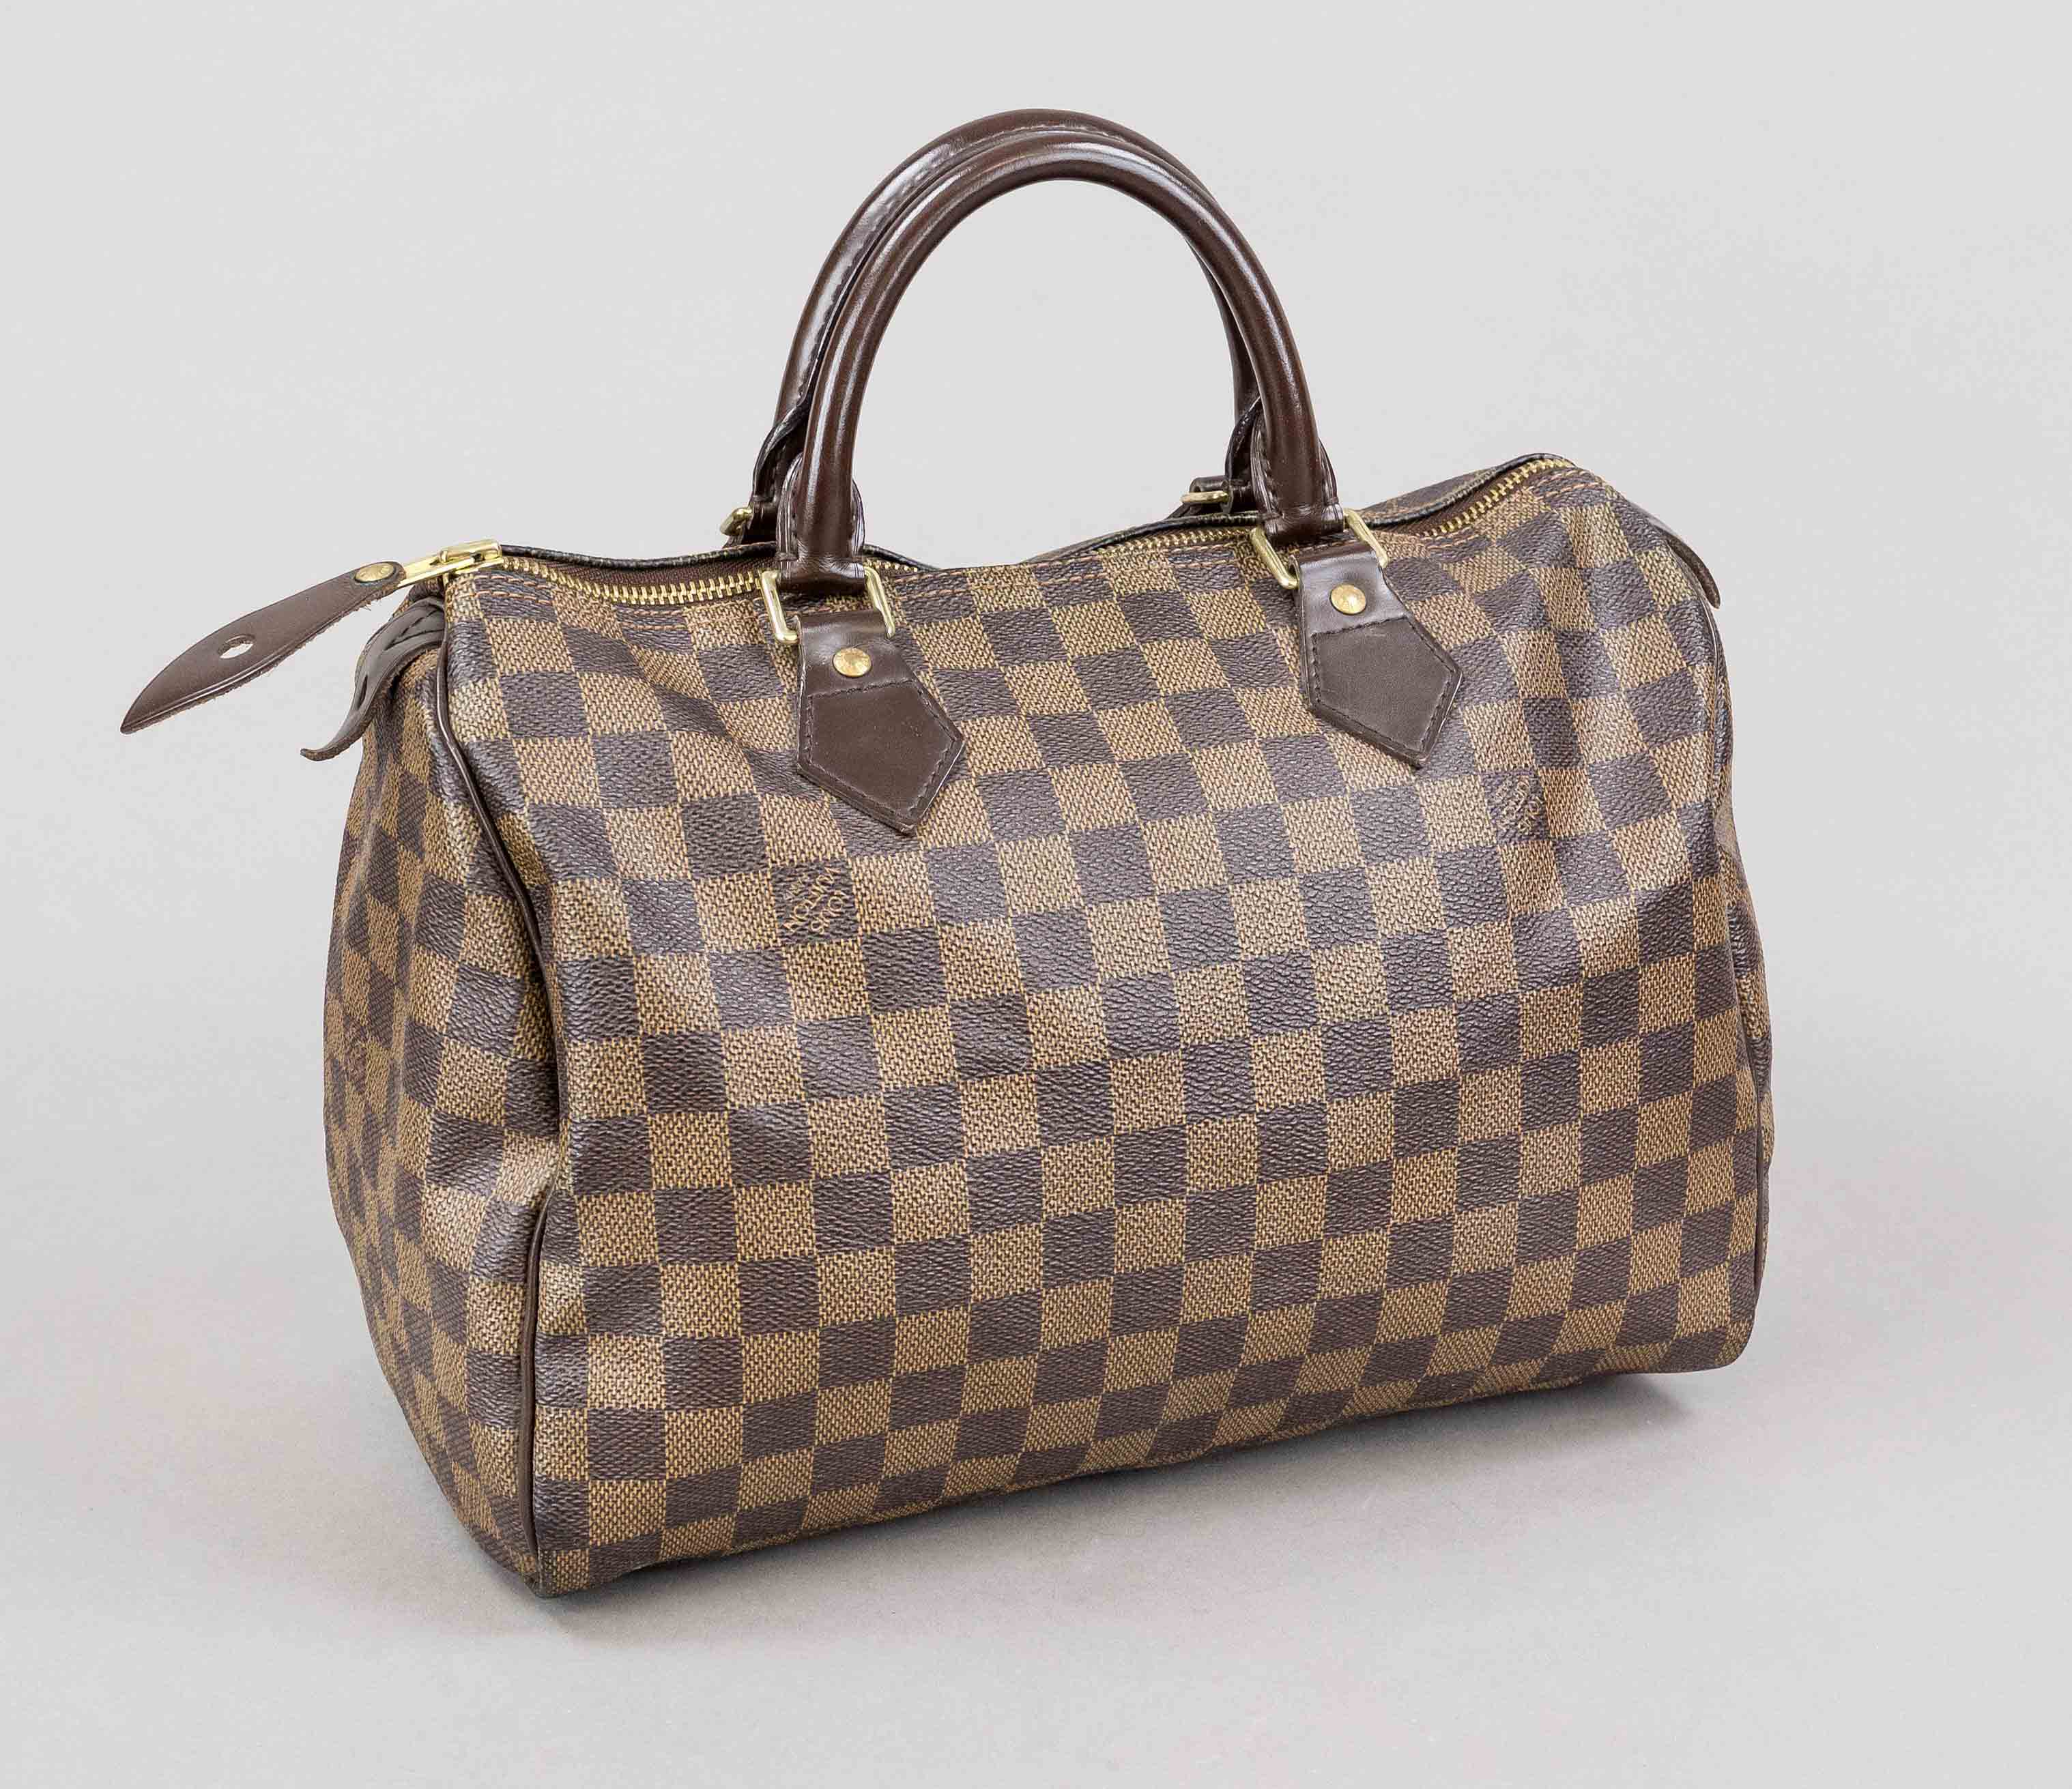 Louis Vuitton, Damier Ebene Canvas Speedy 30, brown checked rubberized cotton fabric with details in